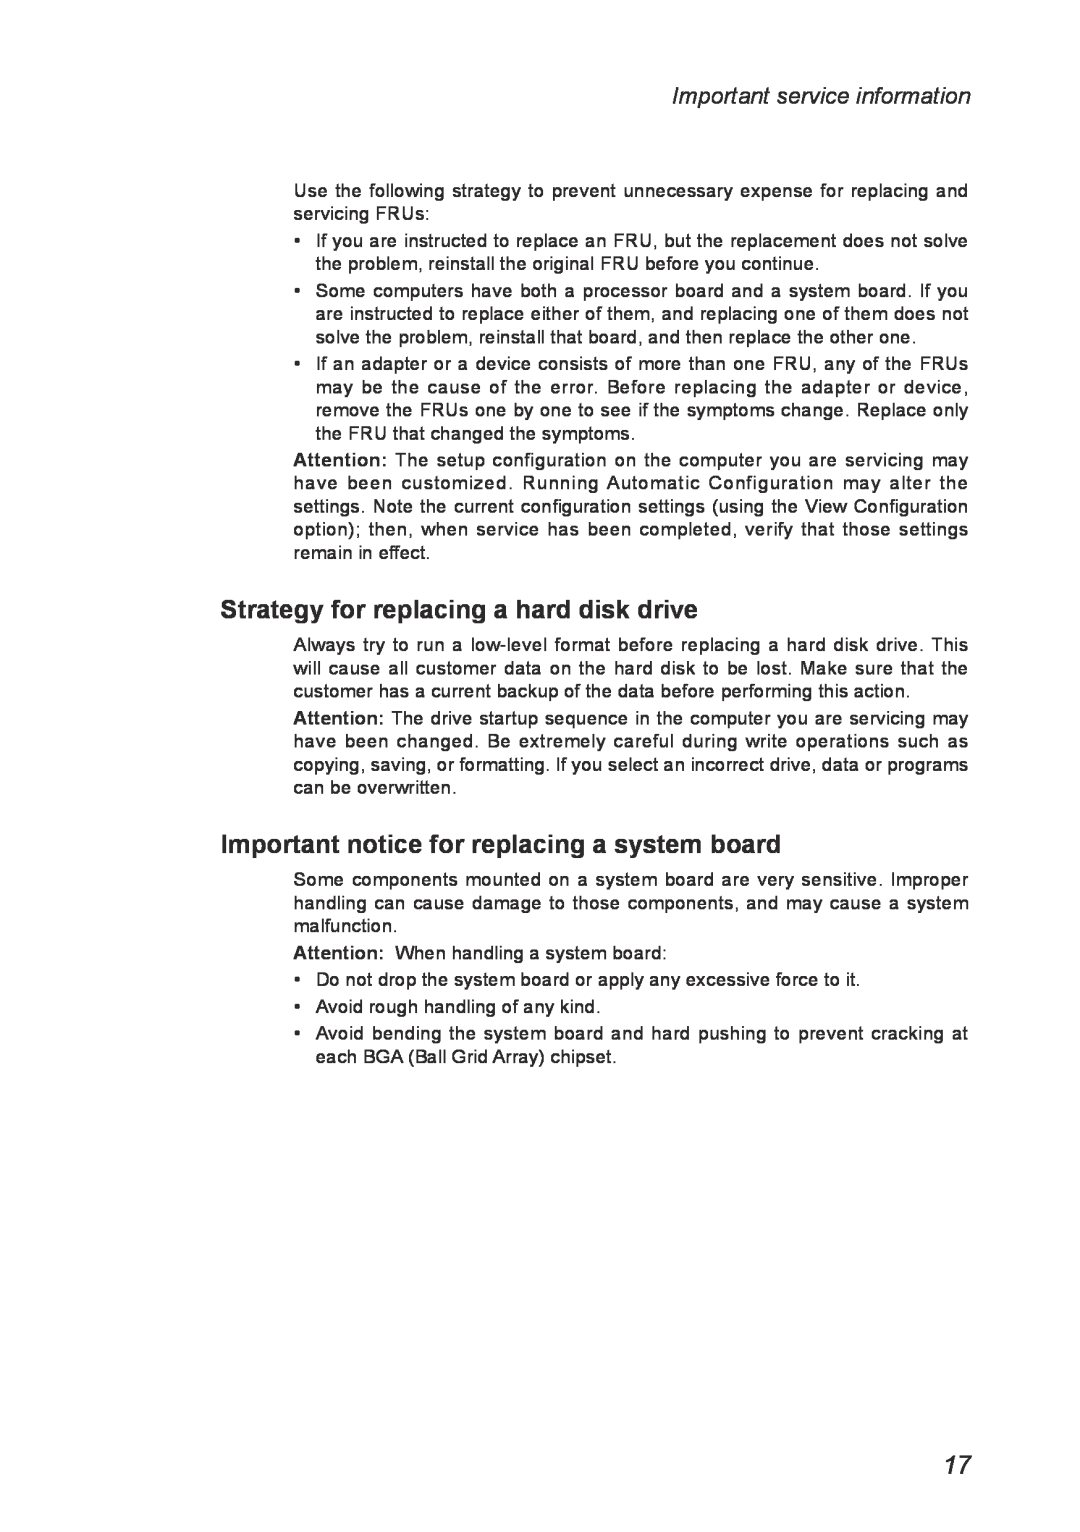 Lenovo Y560 manual Strategy for replacing a hard disk drive, Important notice for replacing a system board 